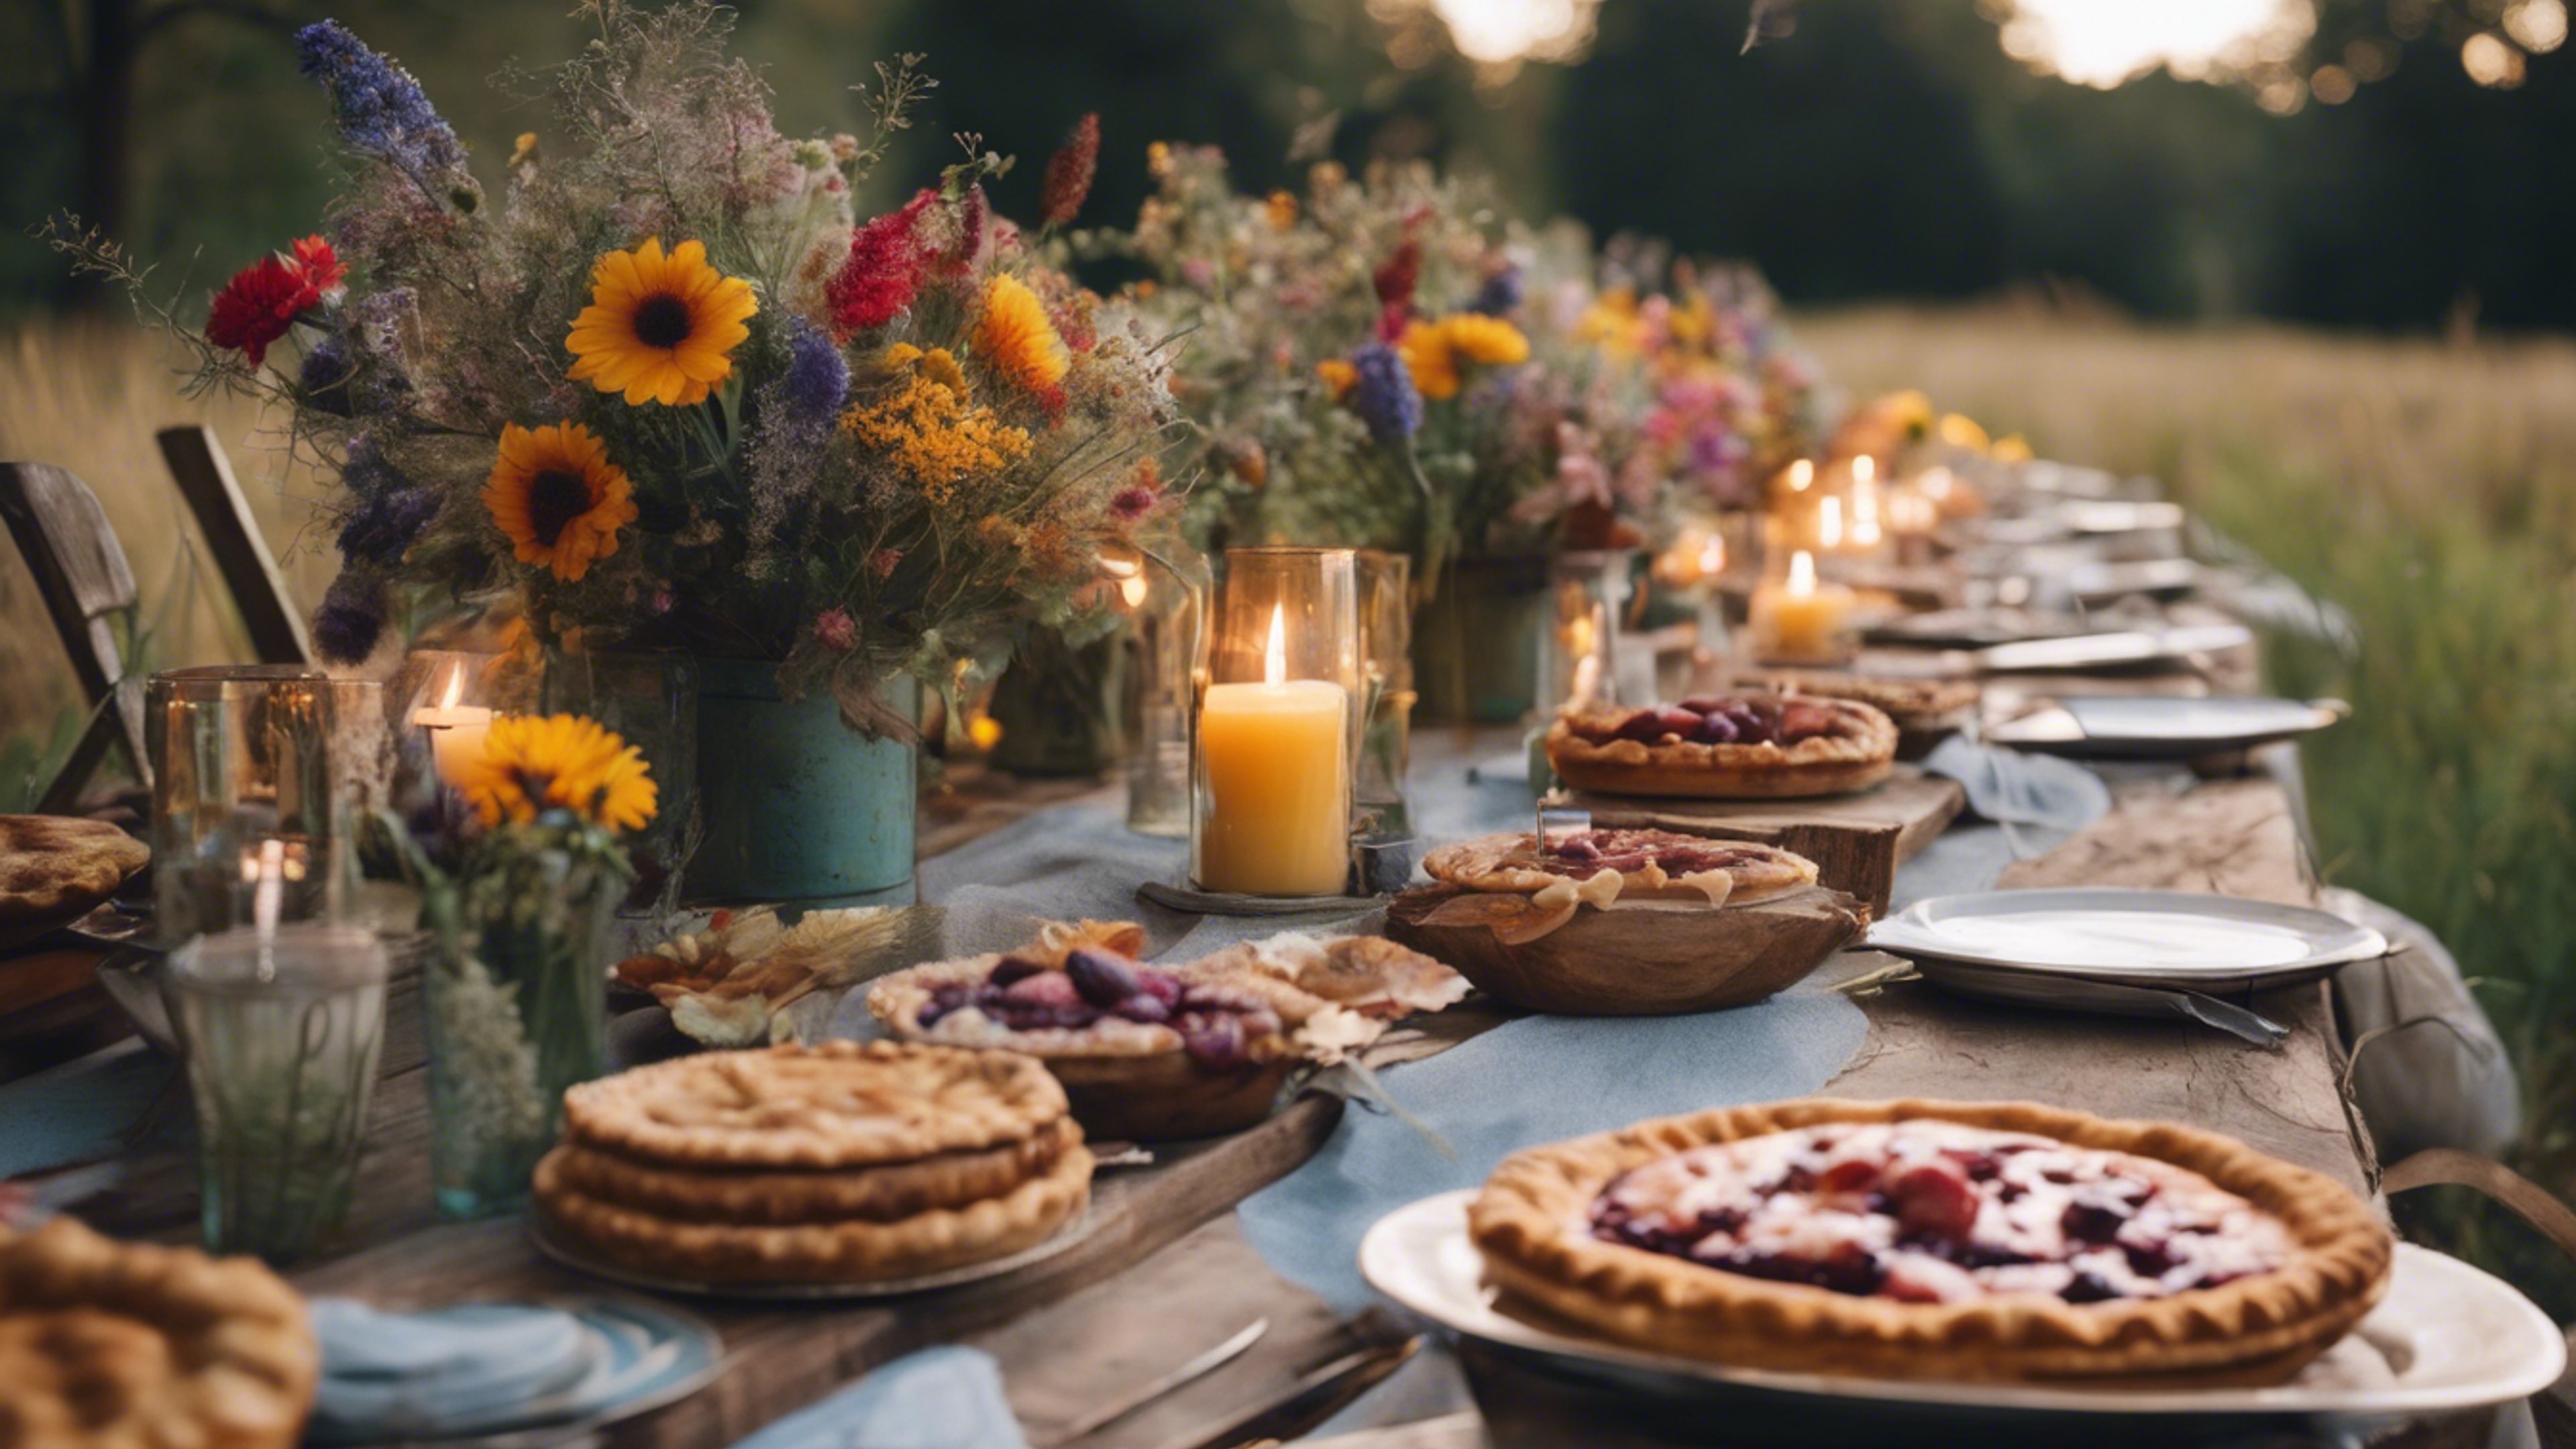 A rustic outdoor gathering; wooden tables covered with candles, homemade pies, and colourful wildflowers. Wallpaper[b624c356f7d649fa8c66]